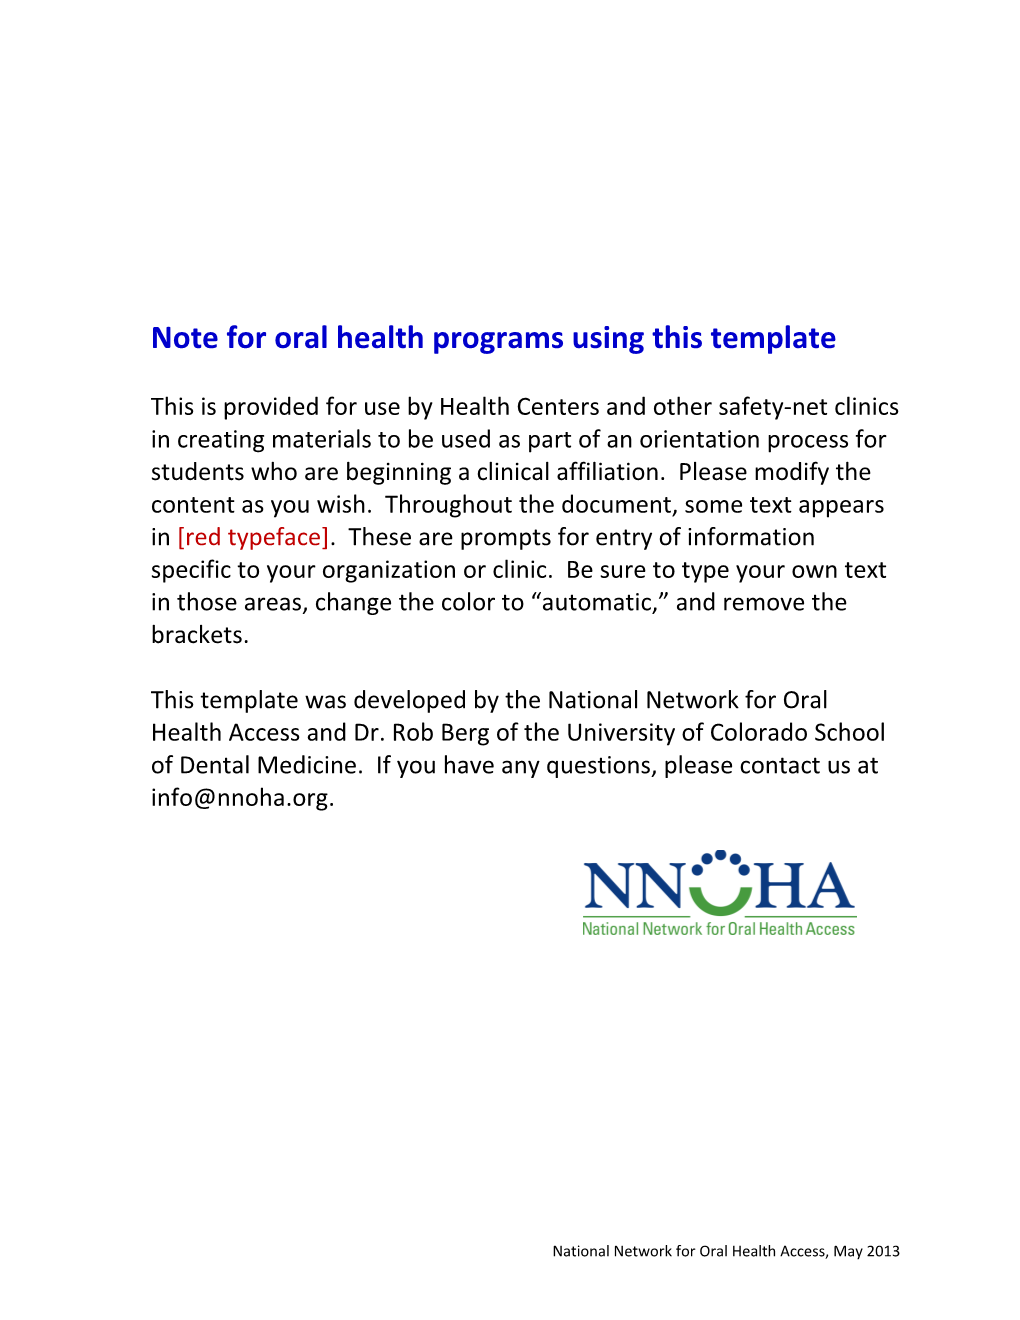 Note for Oral Health Programs Using This Template